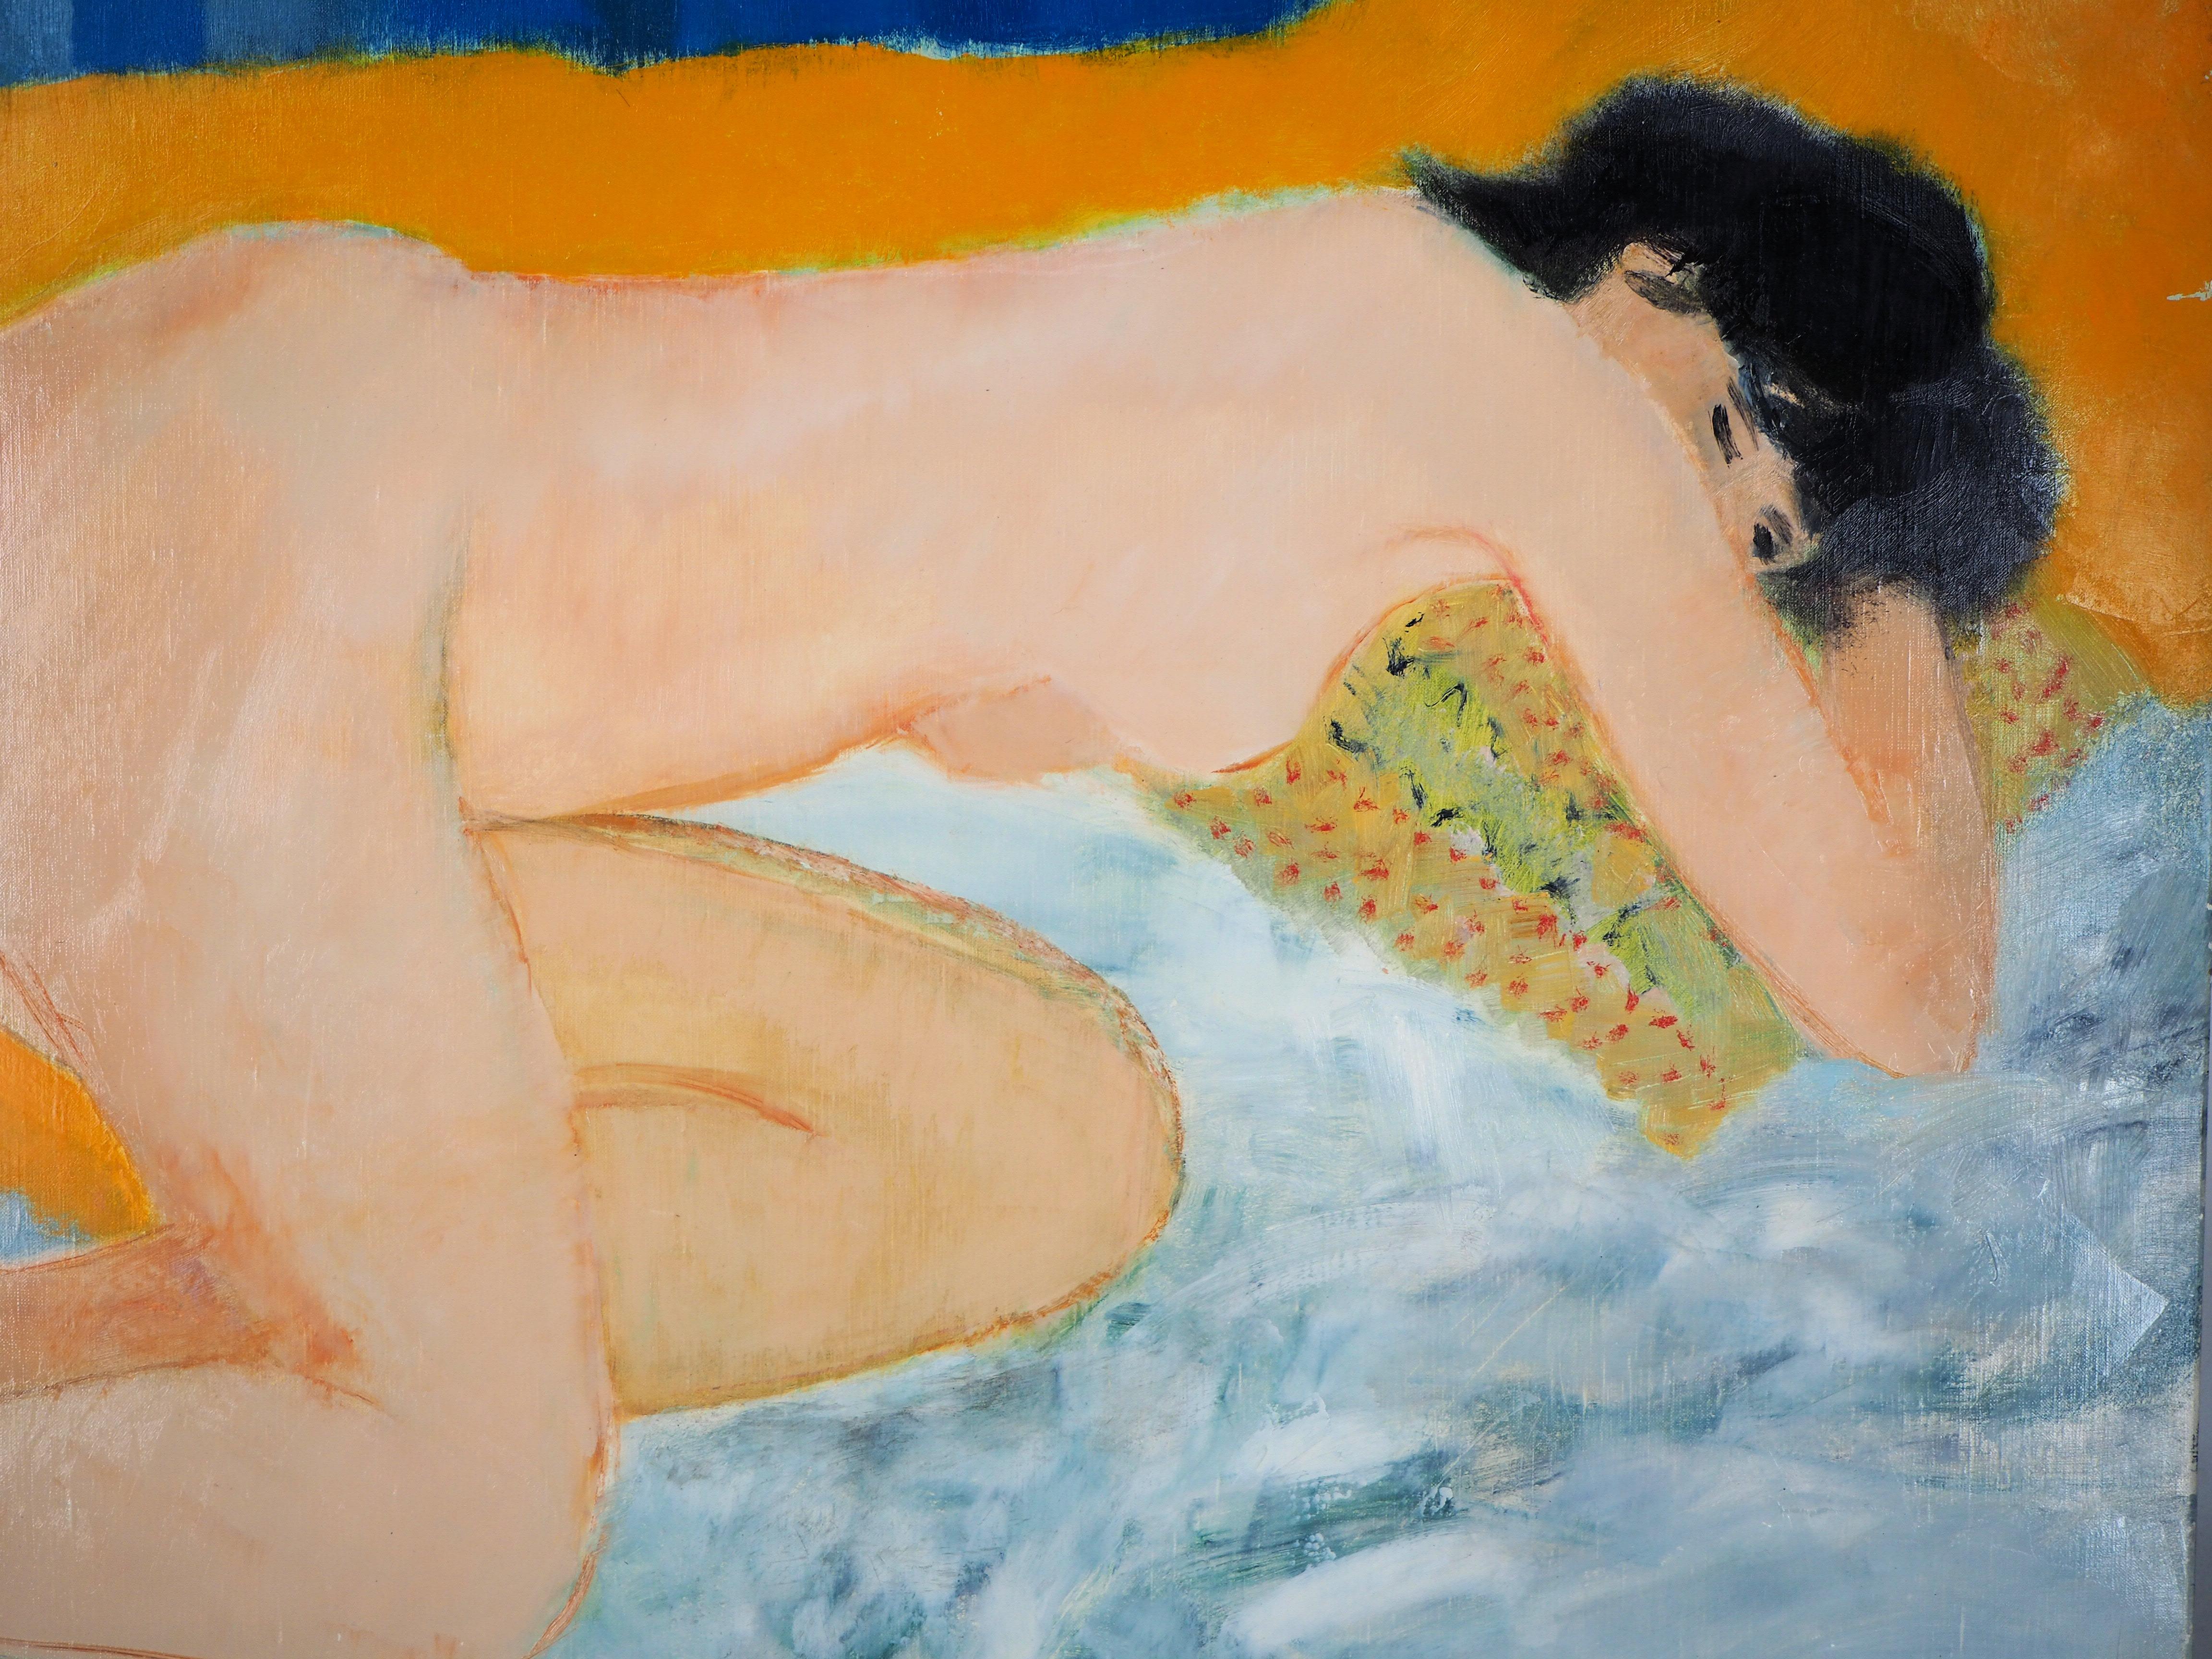 Interior : Nude Asleep on a Yellow Pillow - Original Oil on Canvas, Handsigned - Modern Painting by Guy Bardone